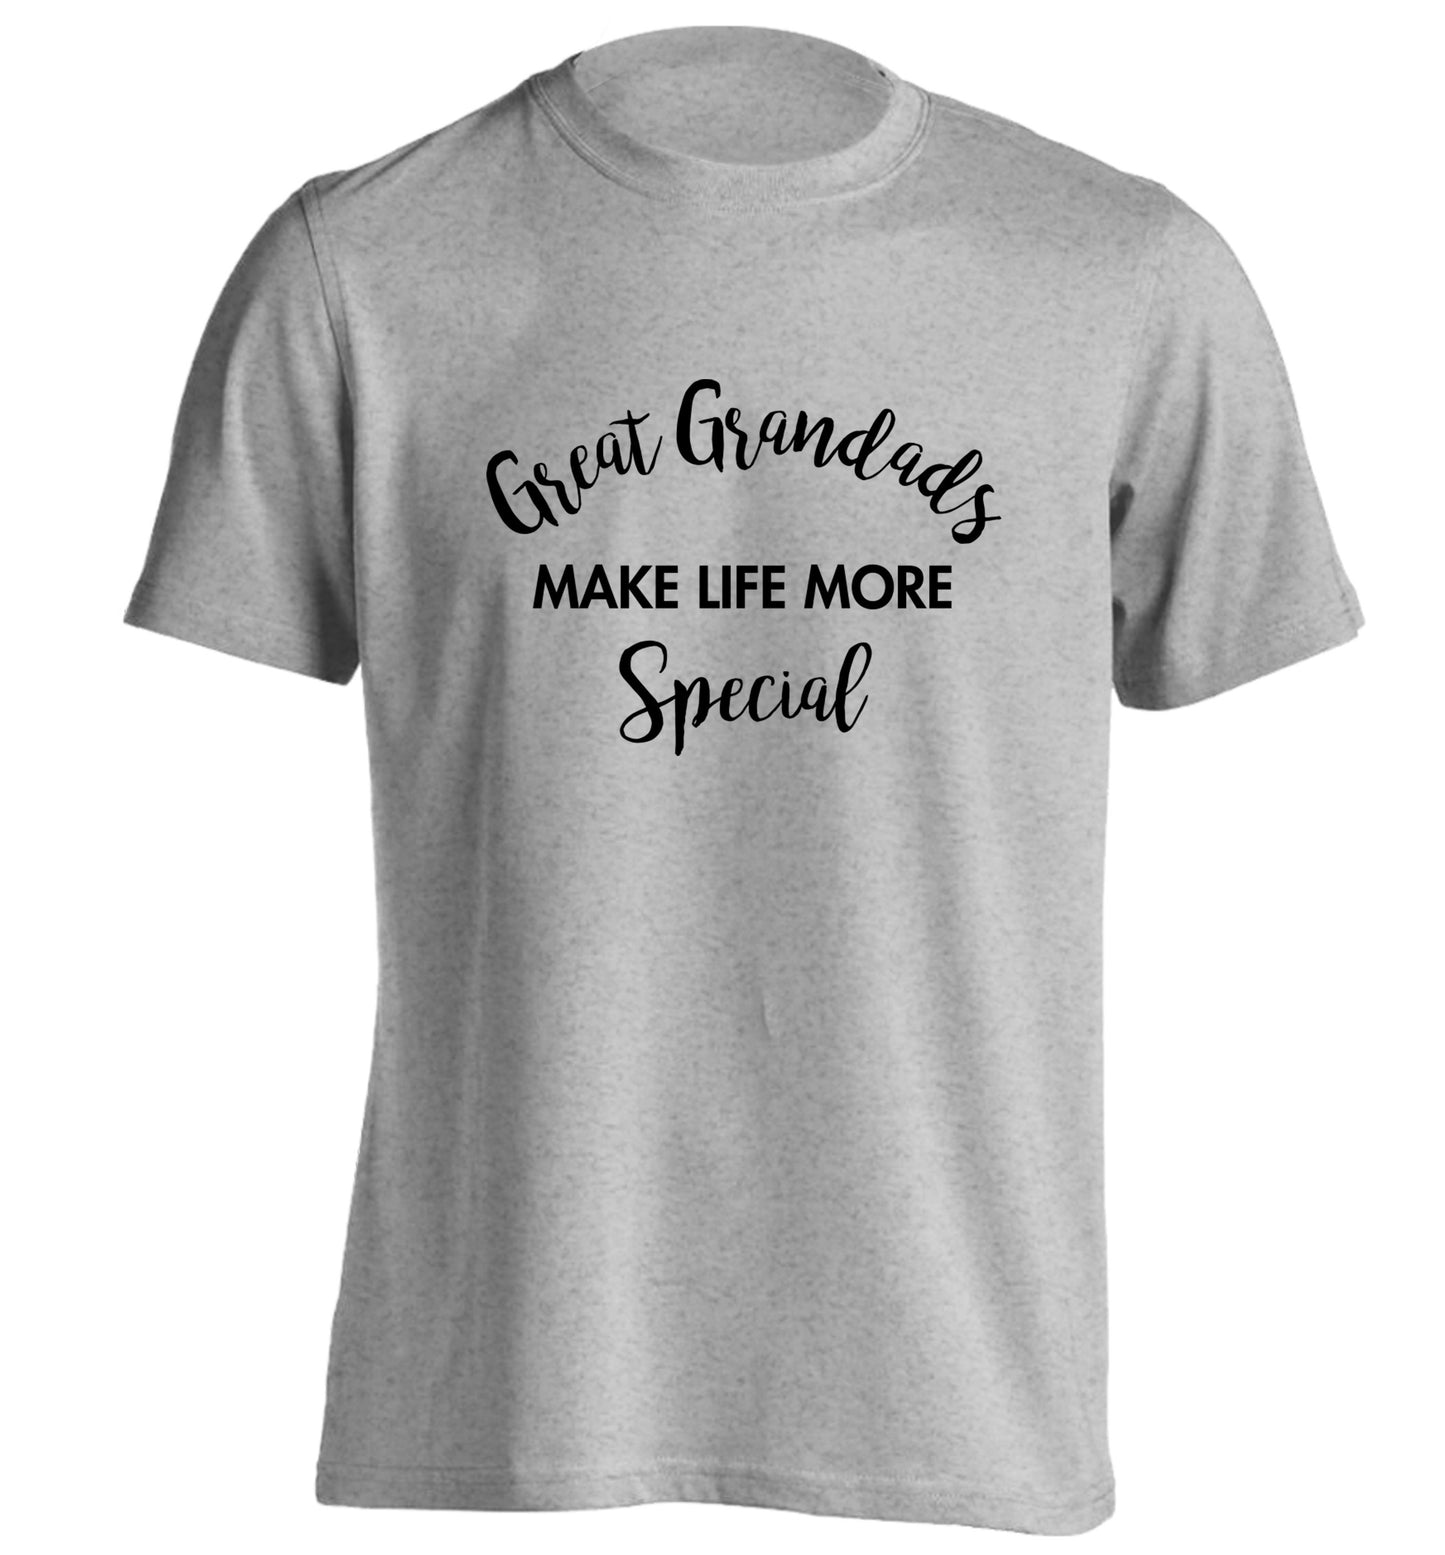 Great Grandads make life more special adults unisex grey Tshirt 2XL